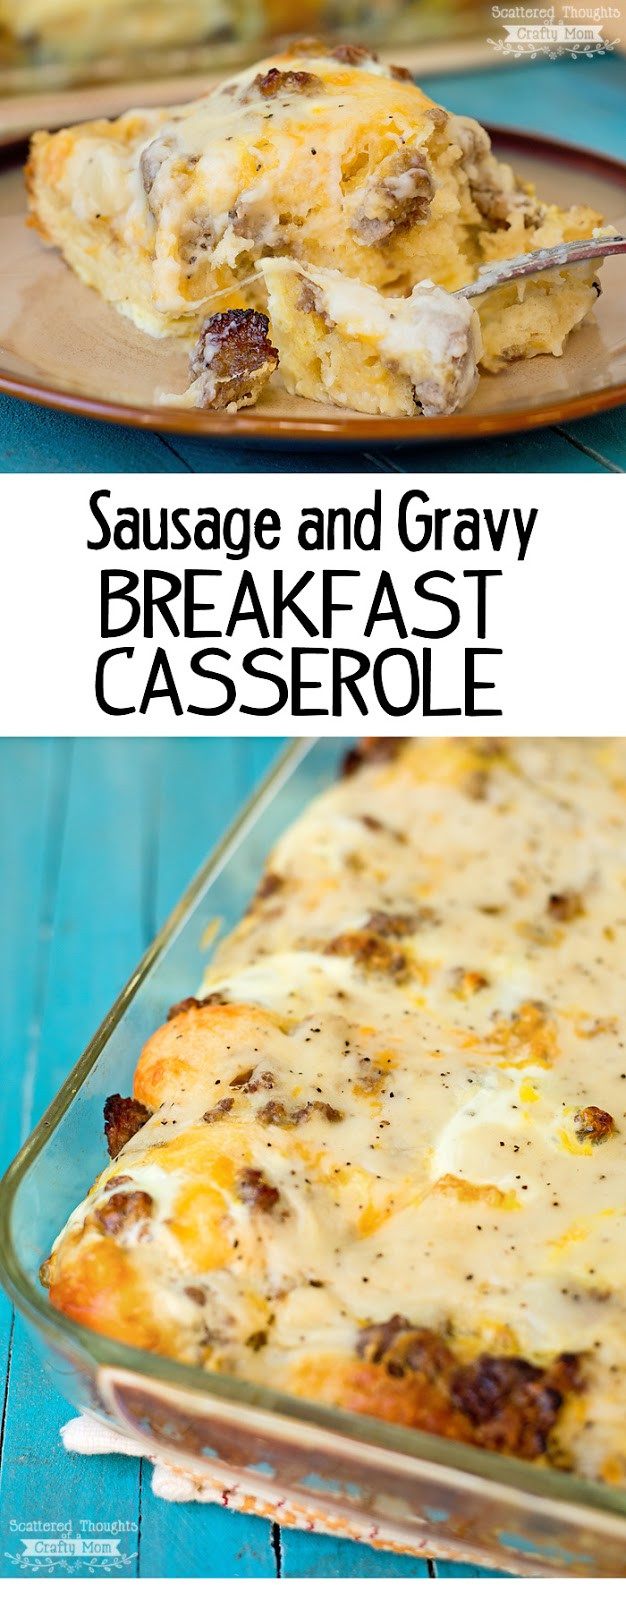 Biscuit And Gravy Casserole Recipe
 Biscuits and Gravy with Sausage and Egg Breakfast